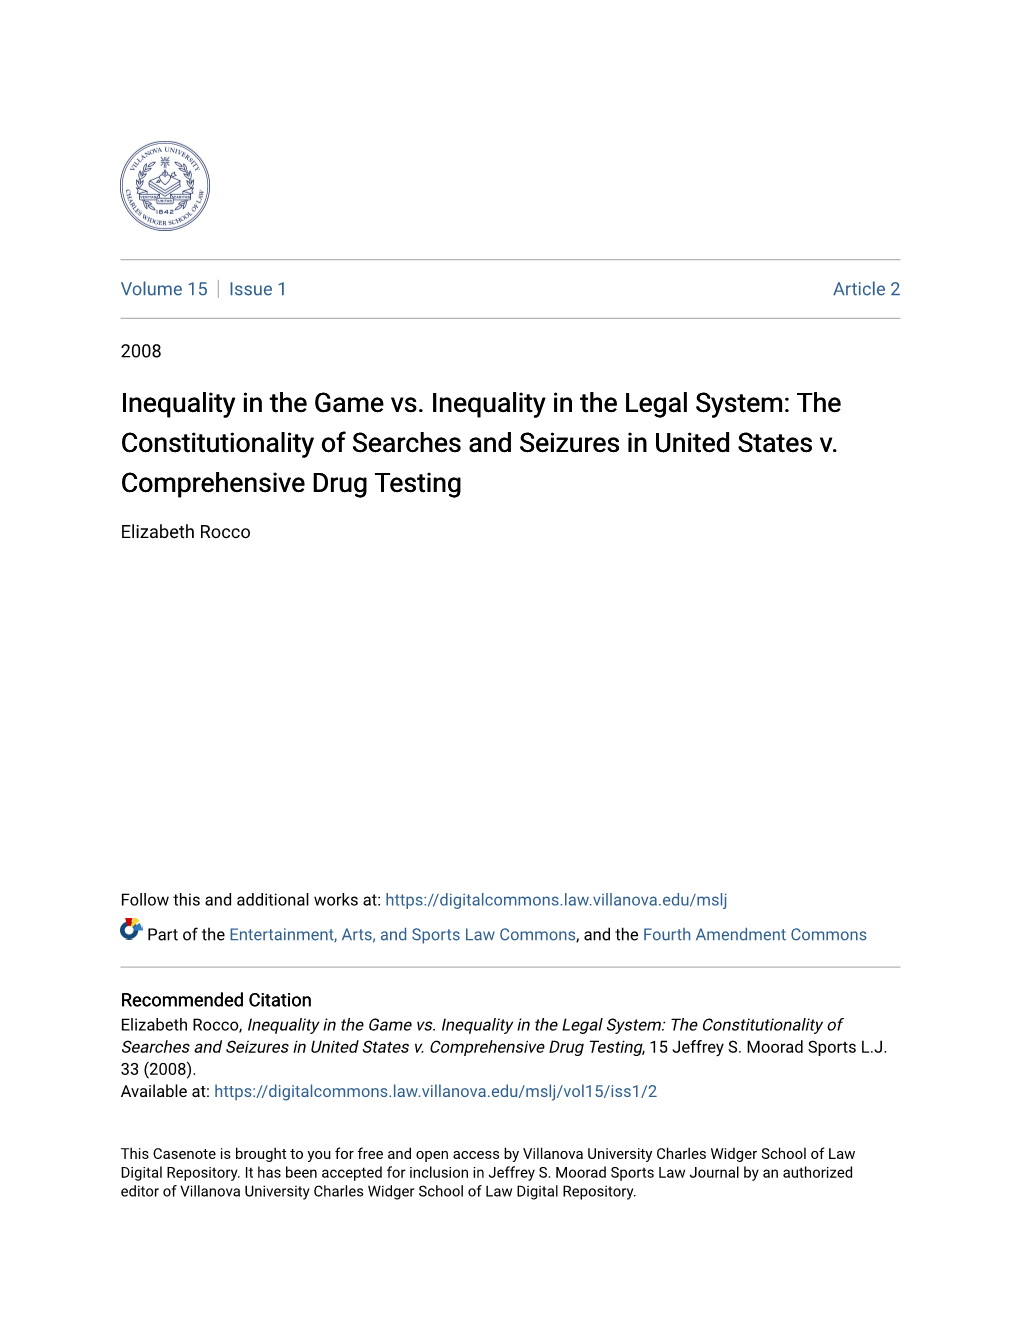 The Constitutionality of Searches and Seizures in United States V. Comprehensive Drug Testing